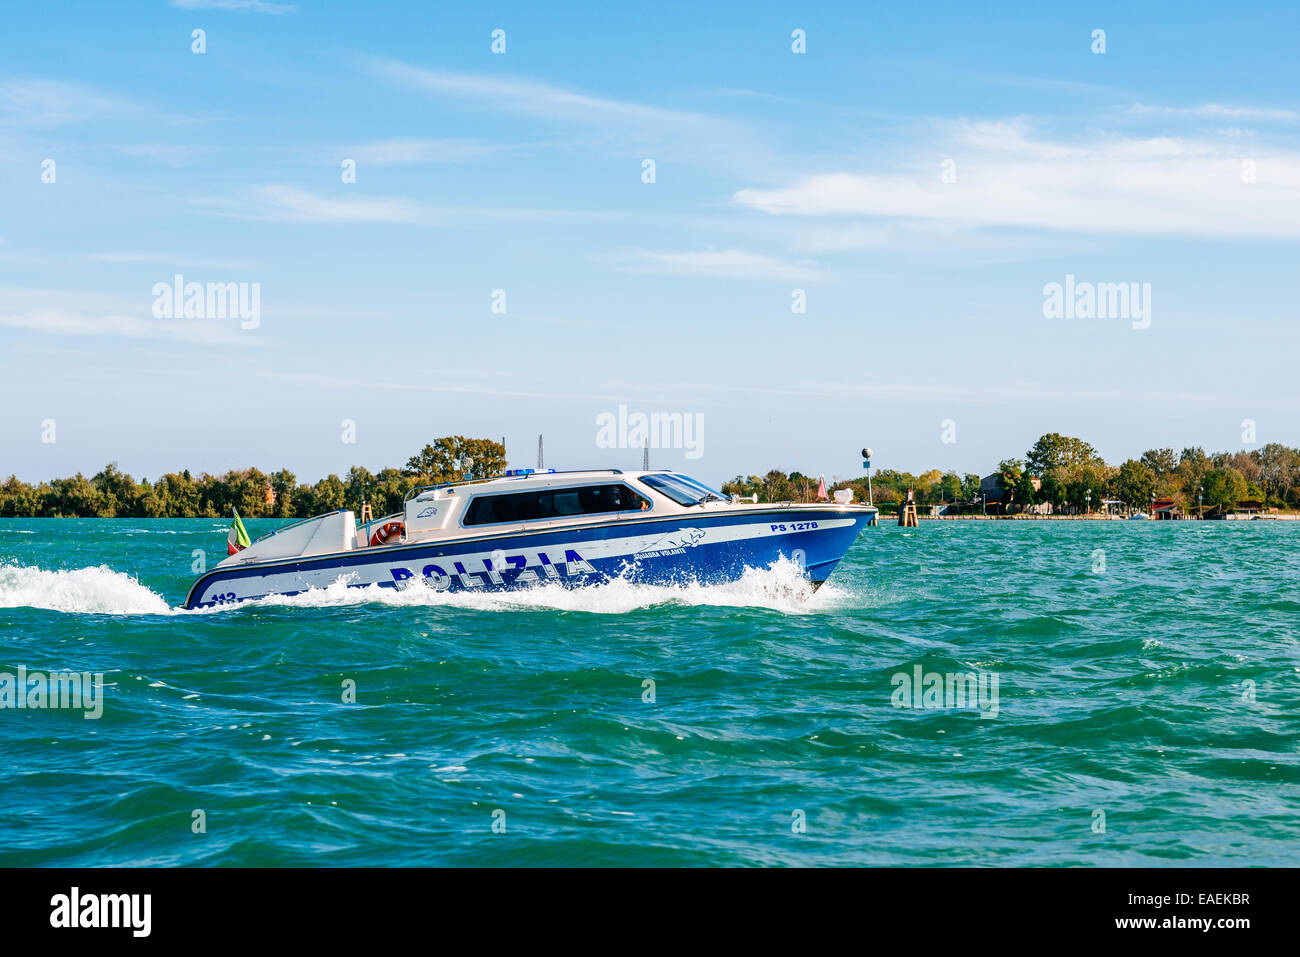 Police patrol motorboat during a security check on Venice lagoon Stock Photo